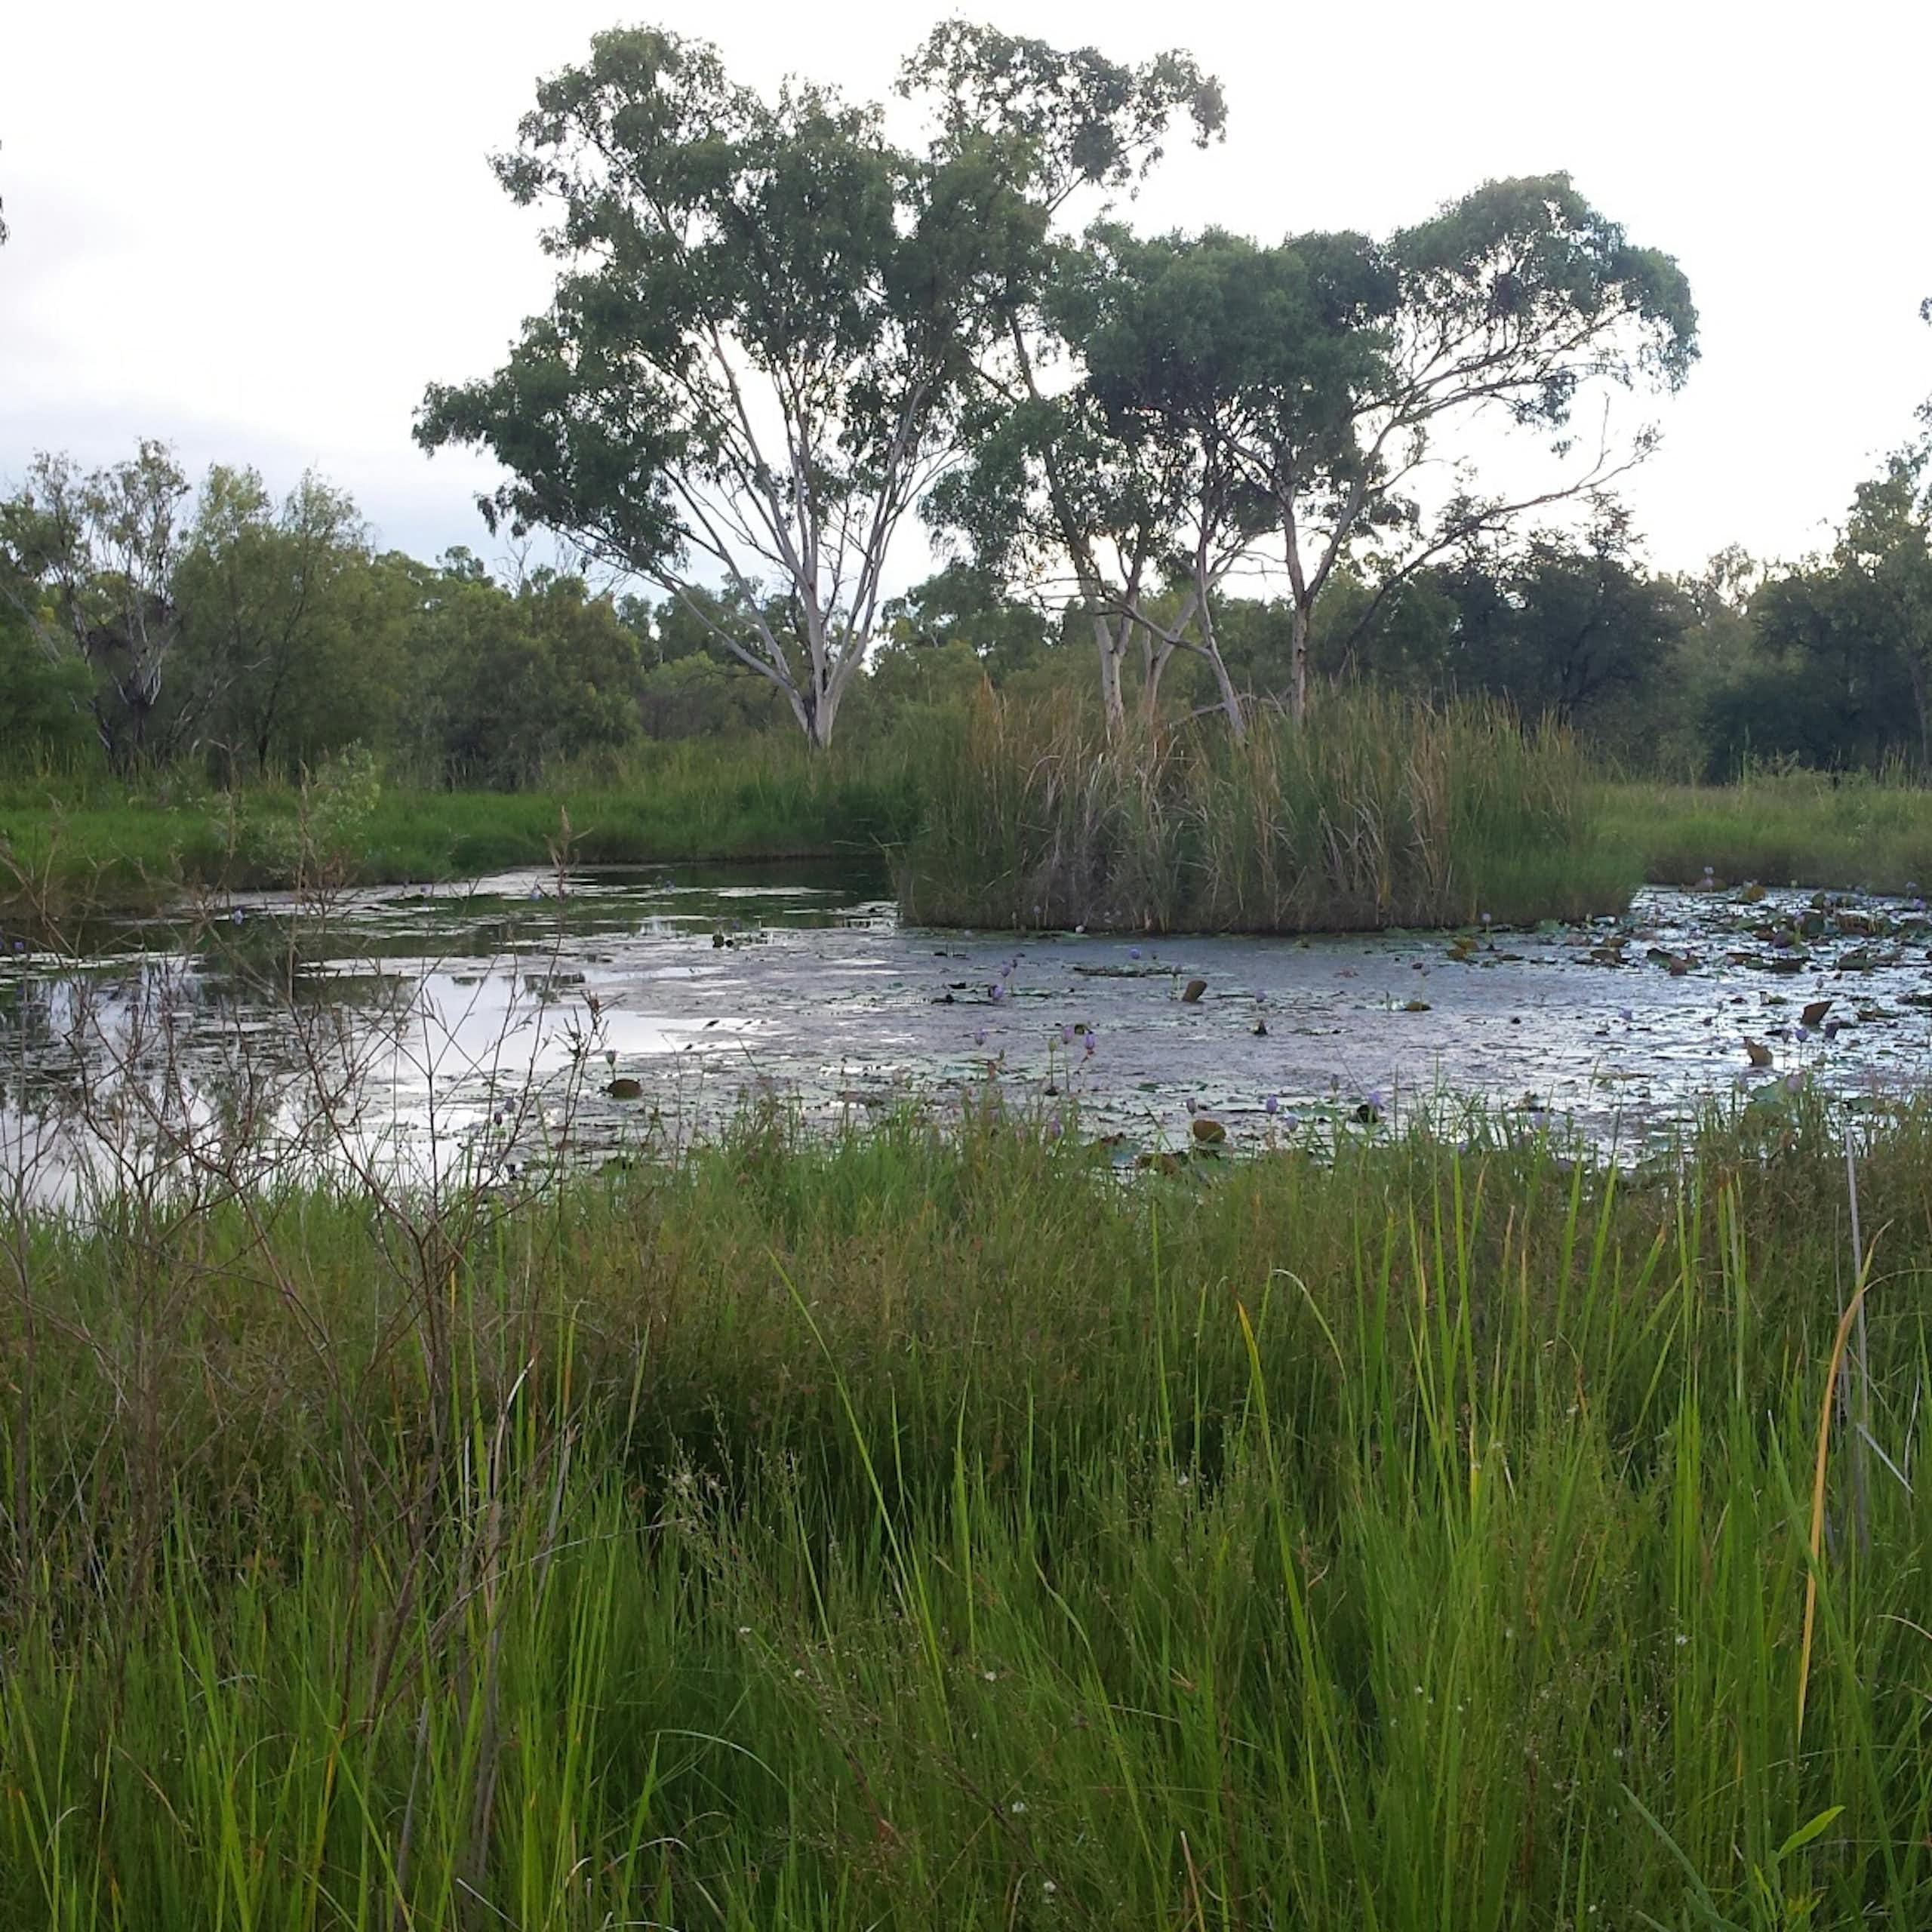 Doongmabulla springs in central Queensland, showing trees in the background, reeds in the foreground and water